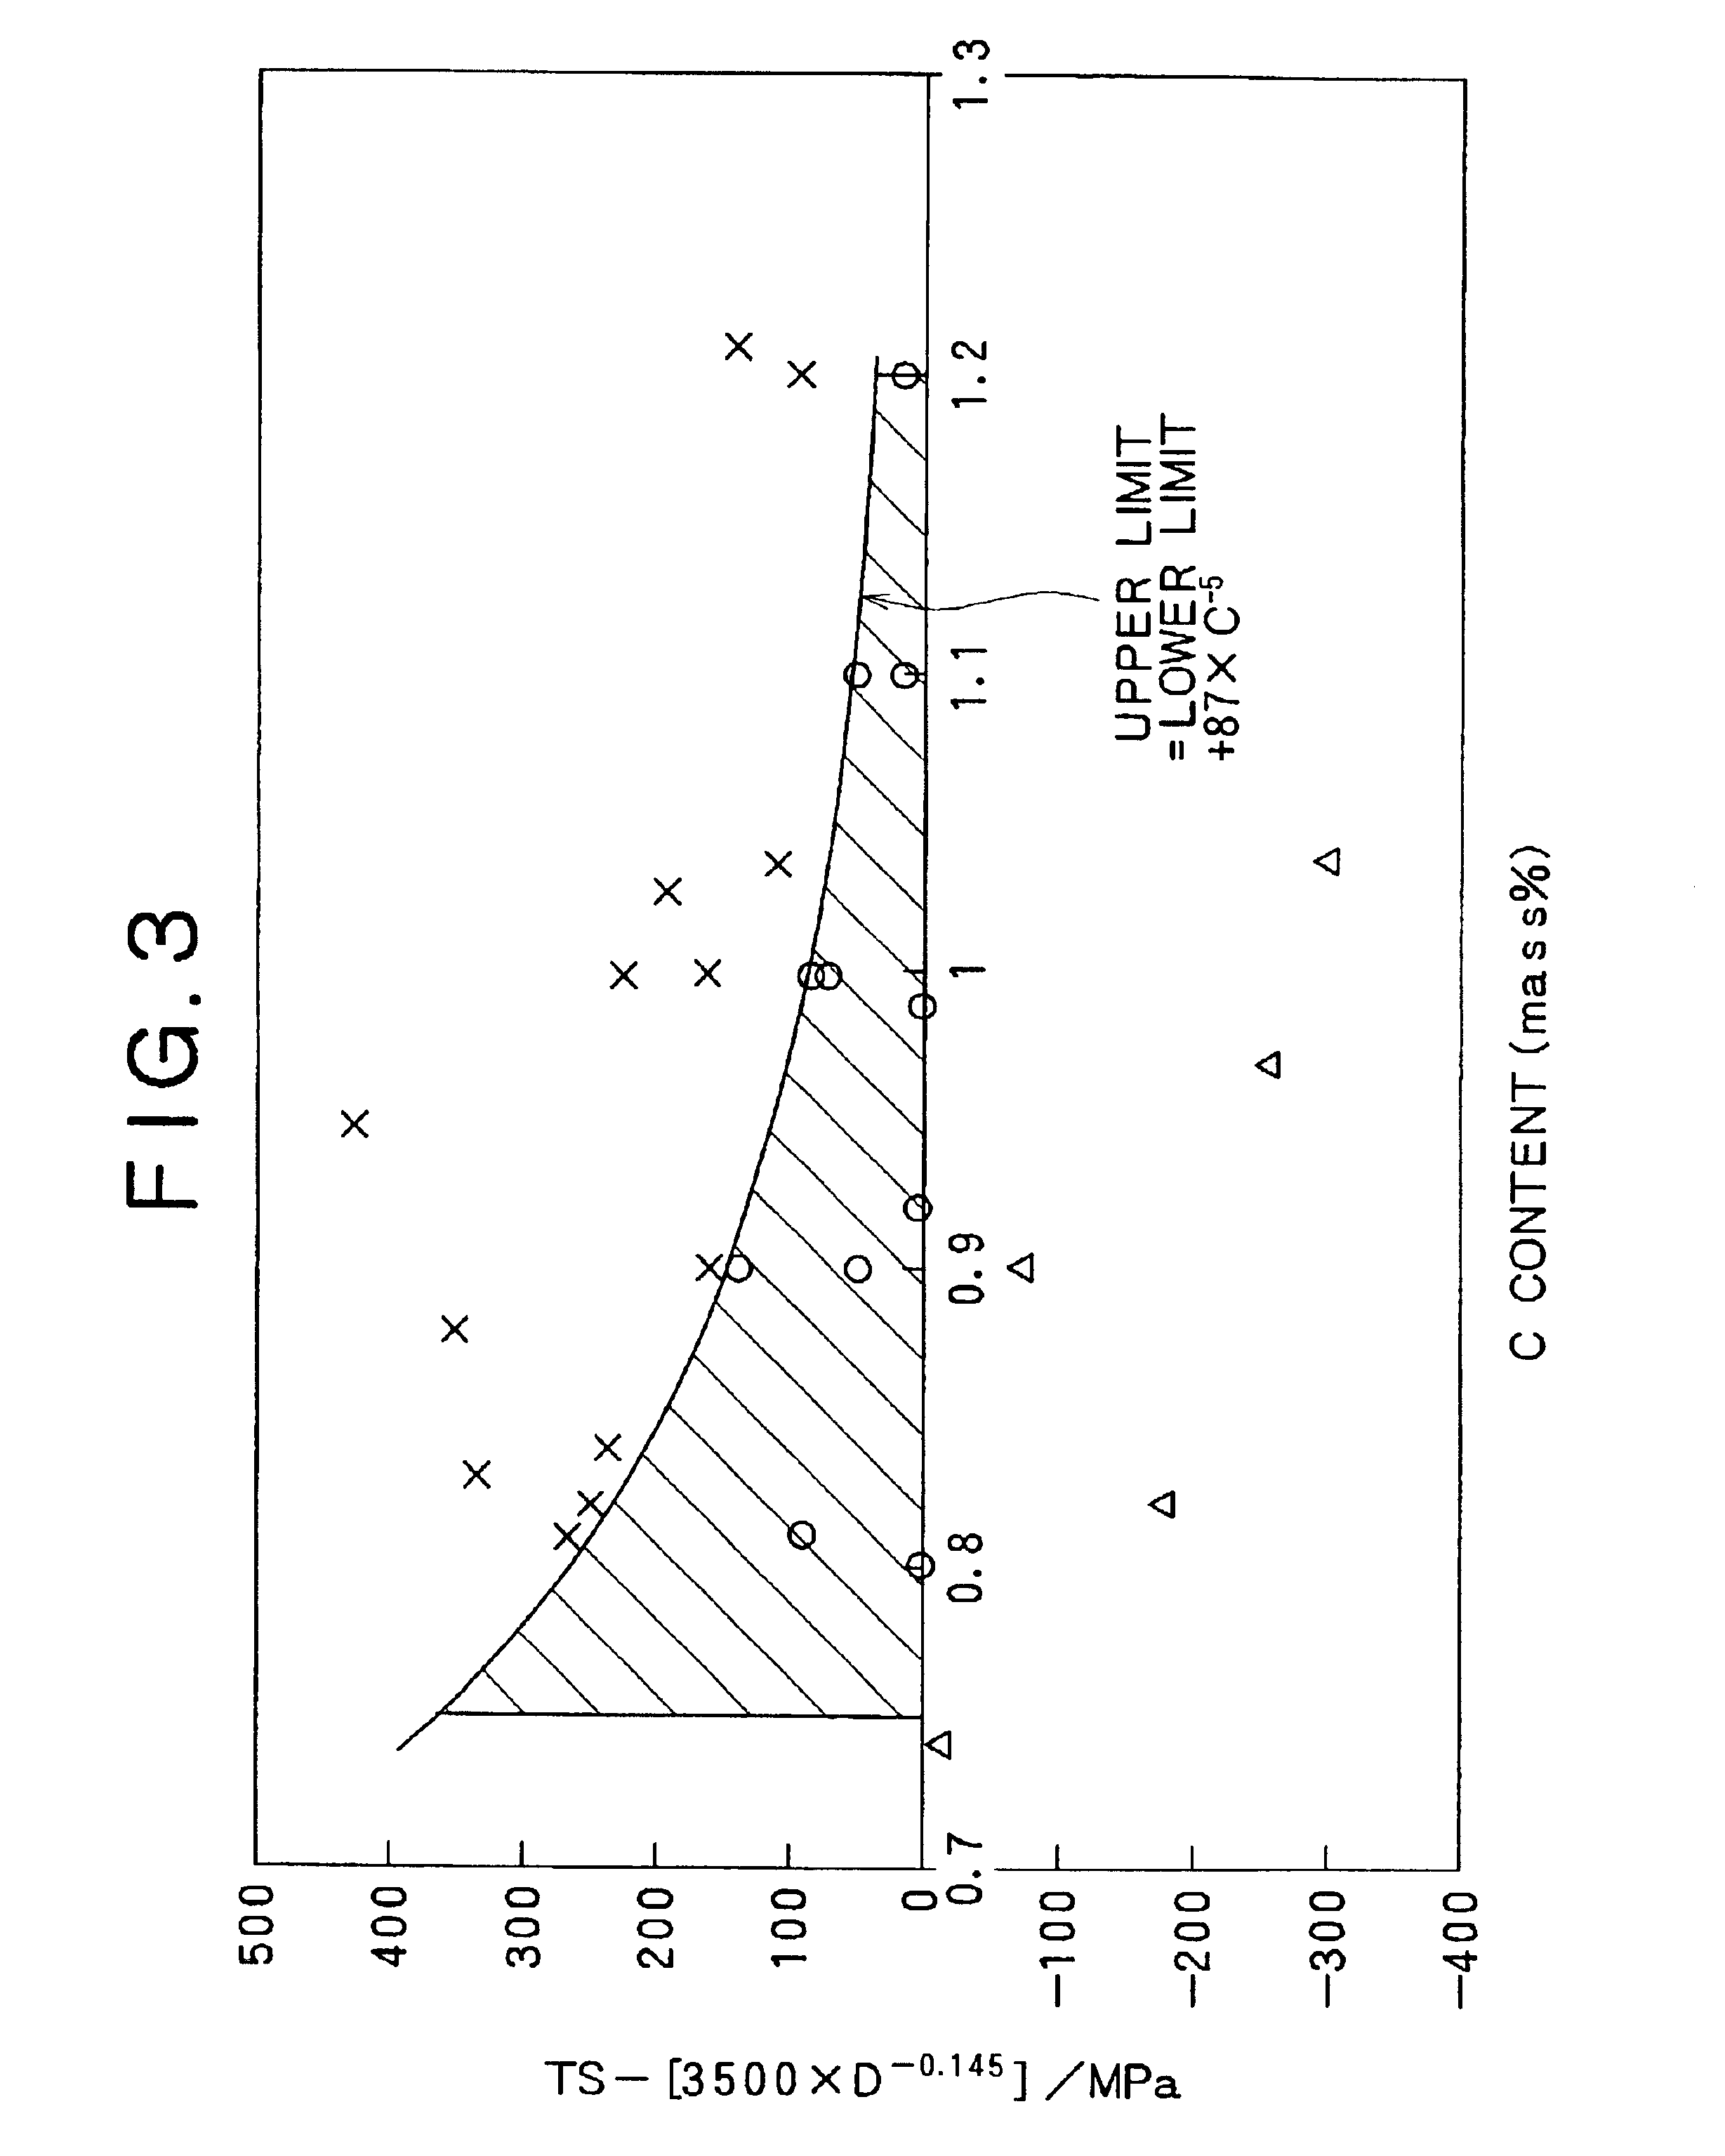 High-strength steel wire excelling in resistance to strain aging embrittlement and longitudinal cracking, and method for production thereof